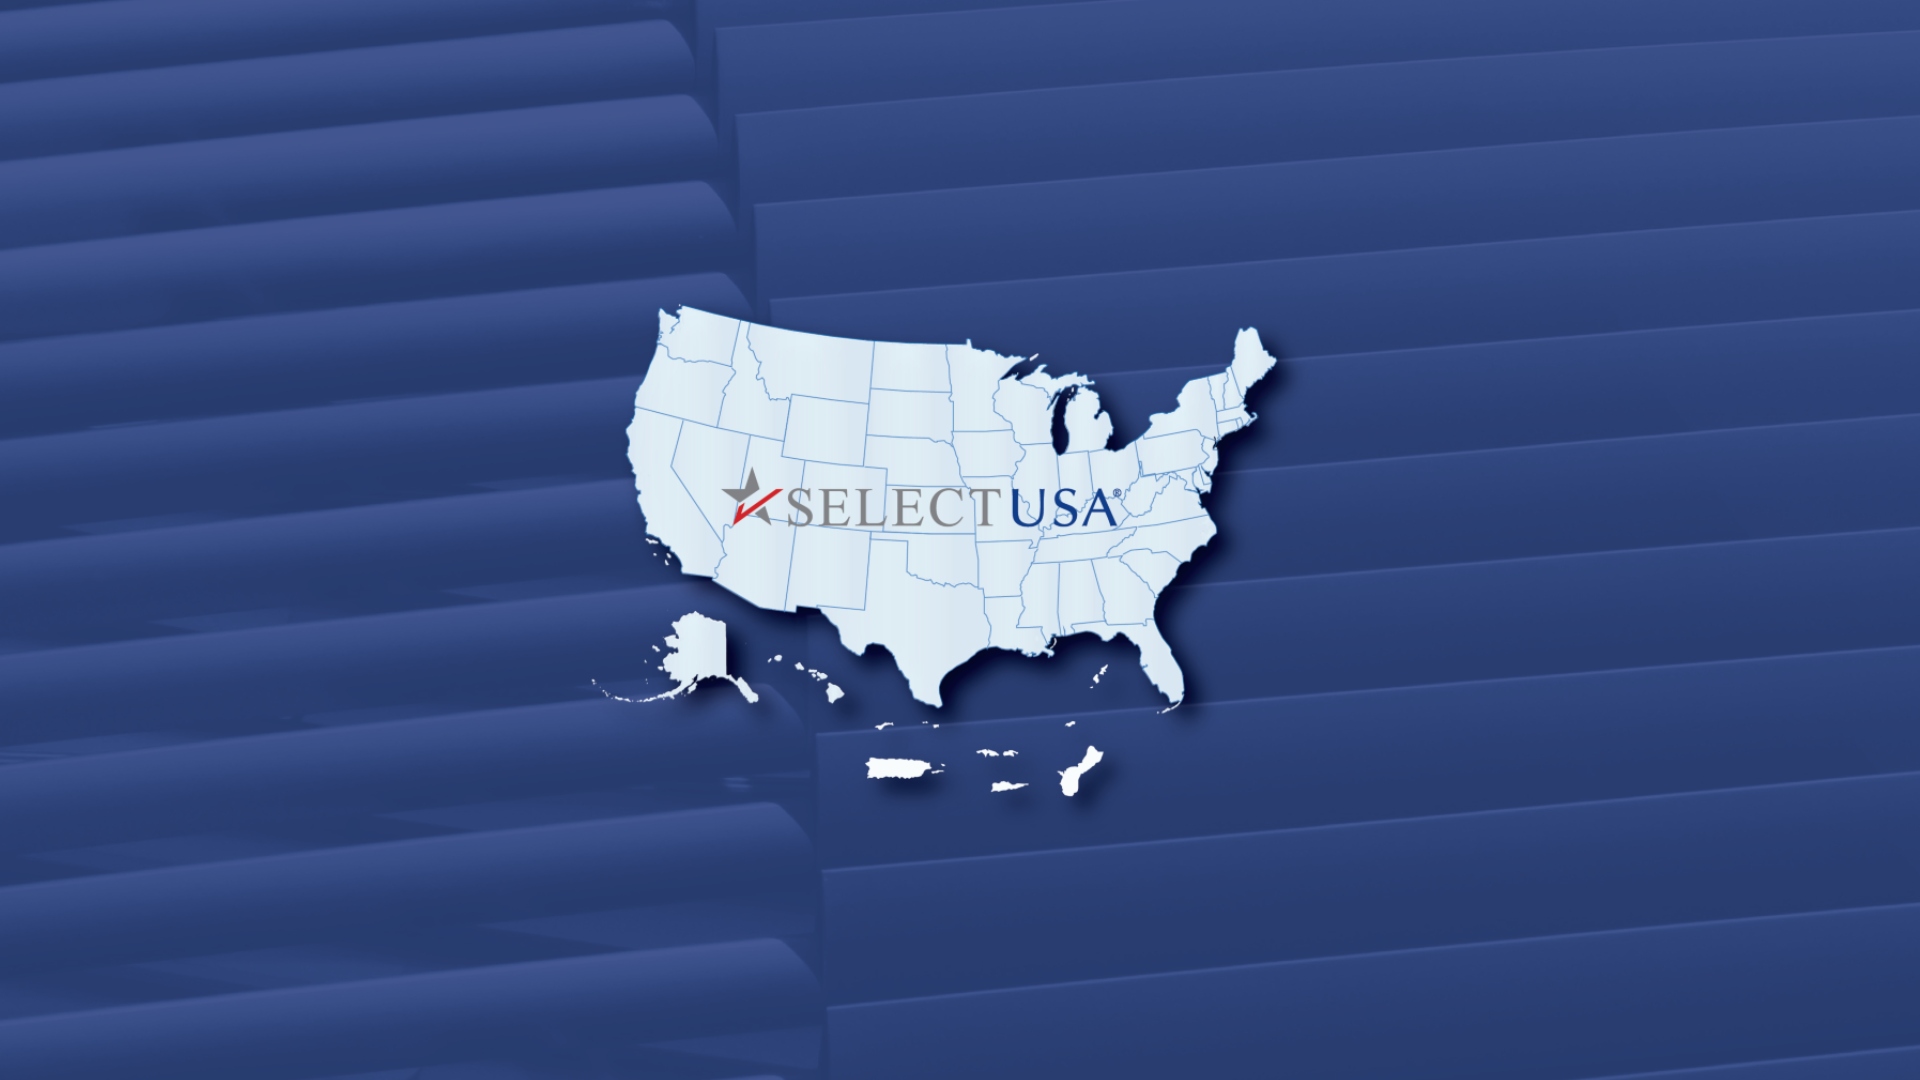 Image of the United States with the SelectUSA logo in the center